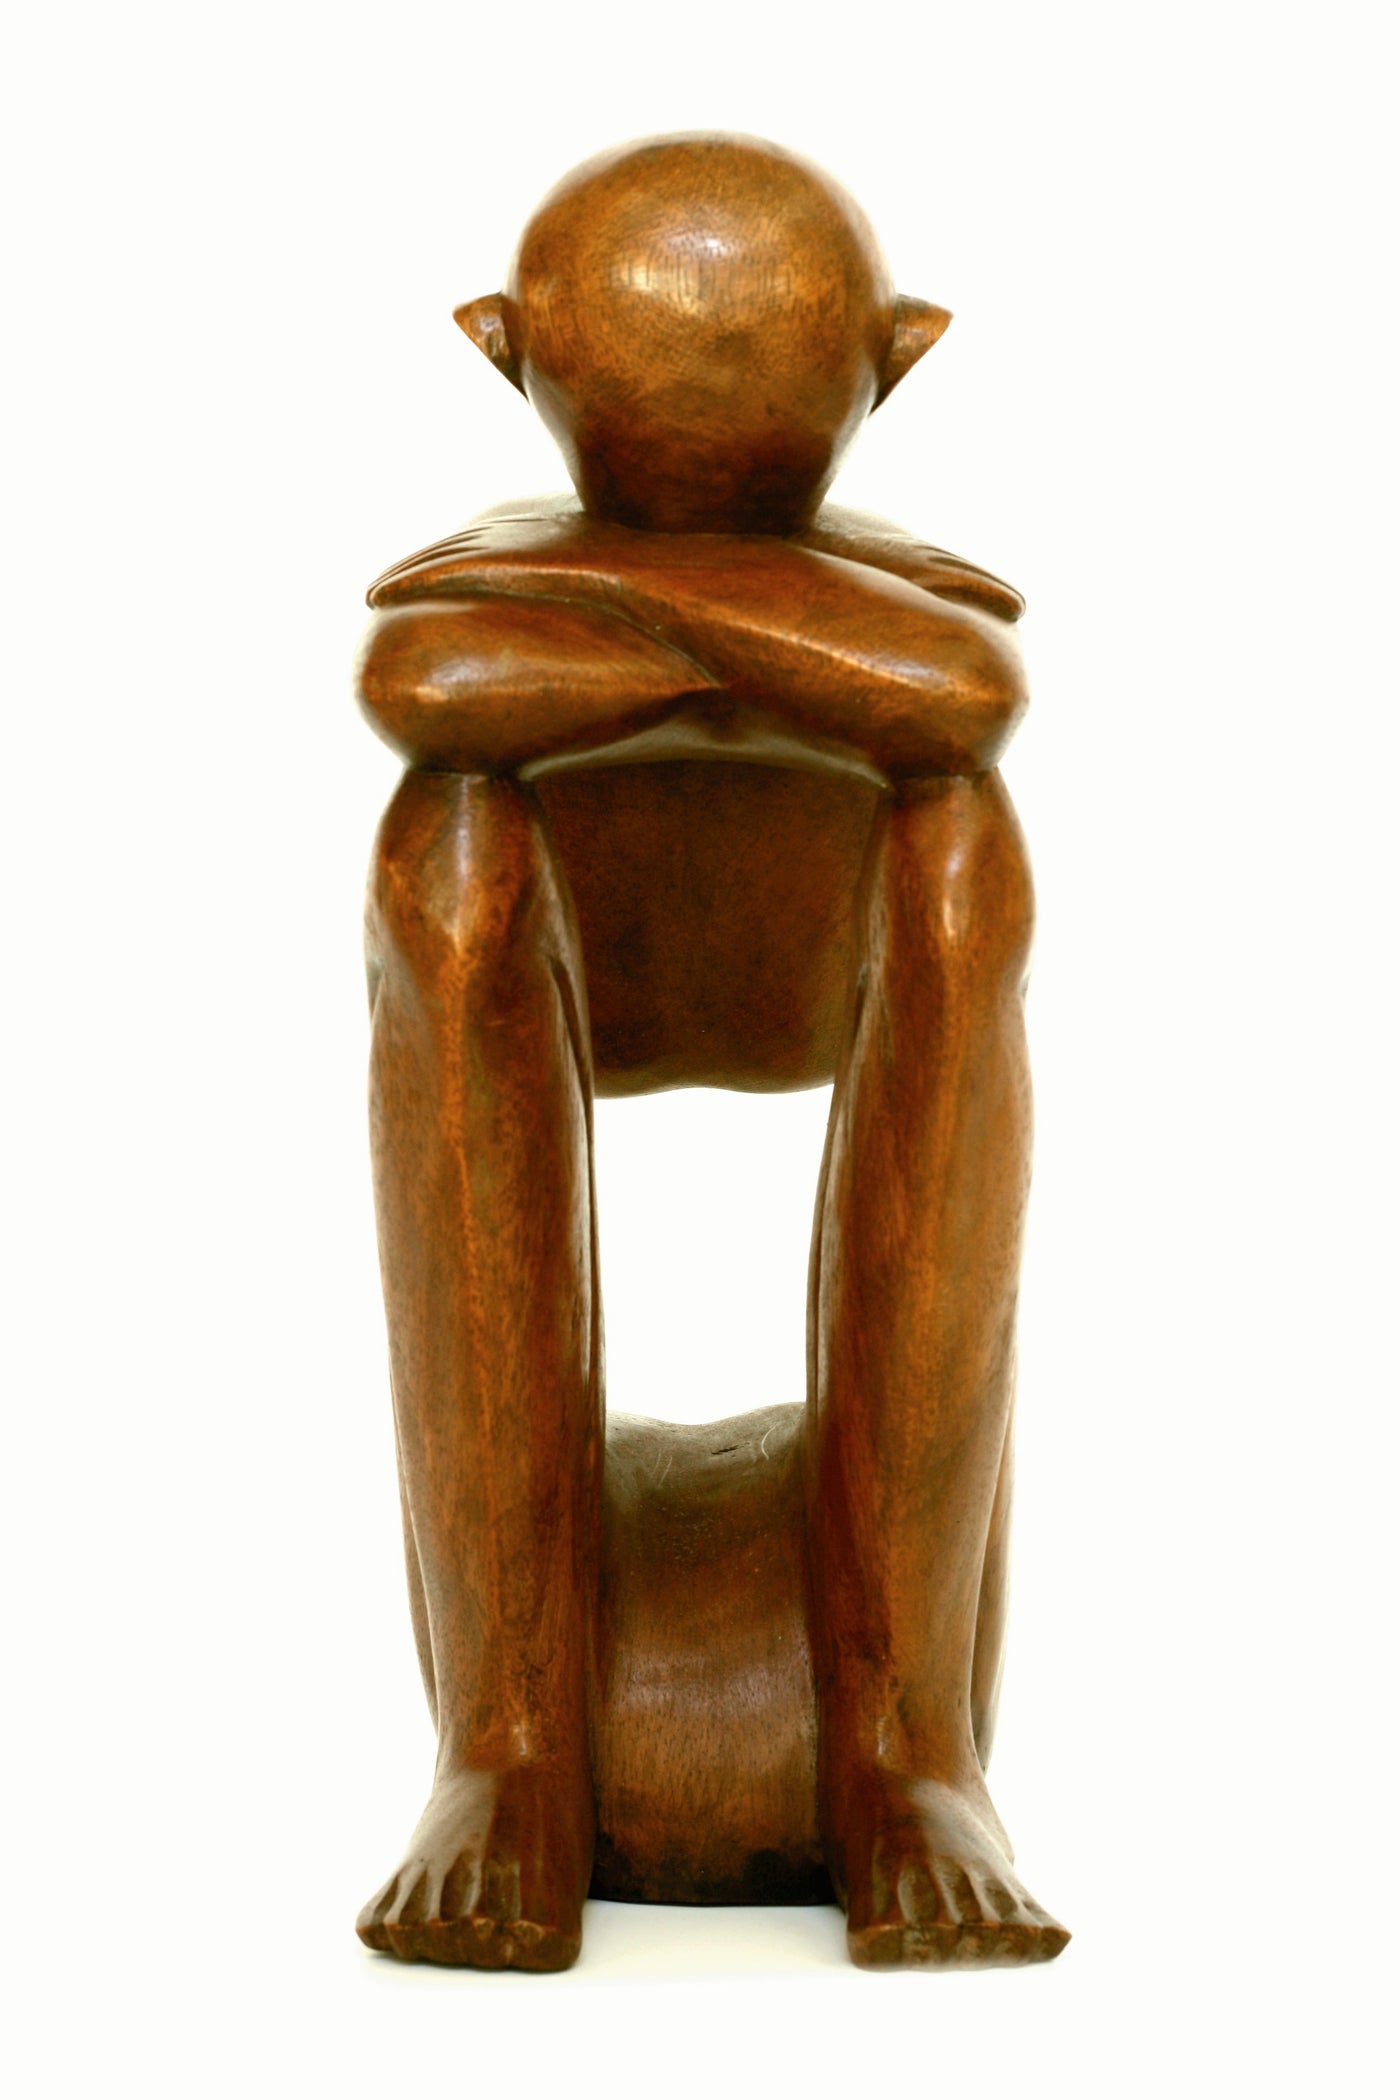 12" Wooden Handmade Abstract Sculpture Handcrafted "Resting Man" Home Decor Decorative Figurine Accent Decoration Hand Carved Statue